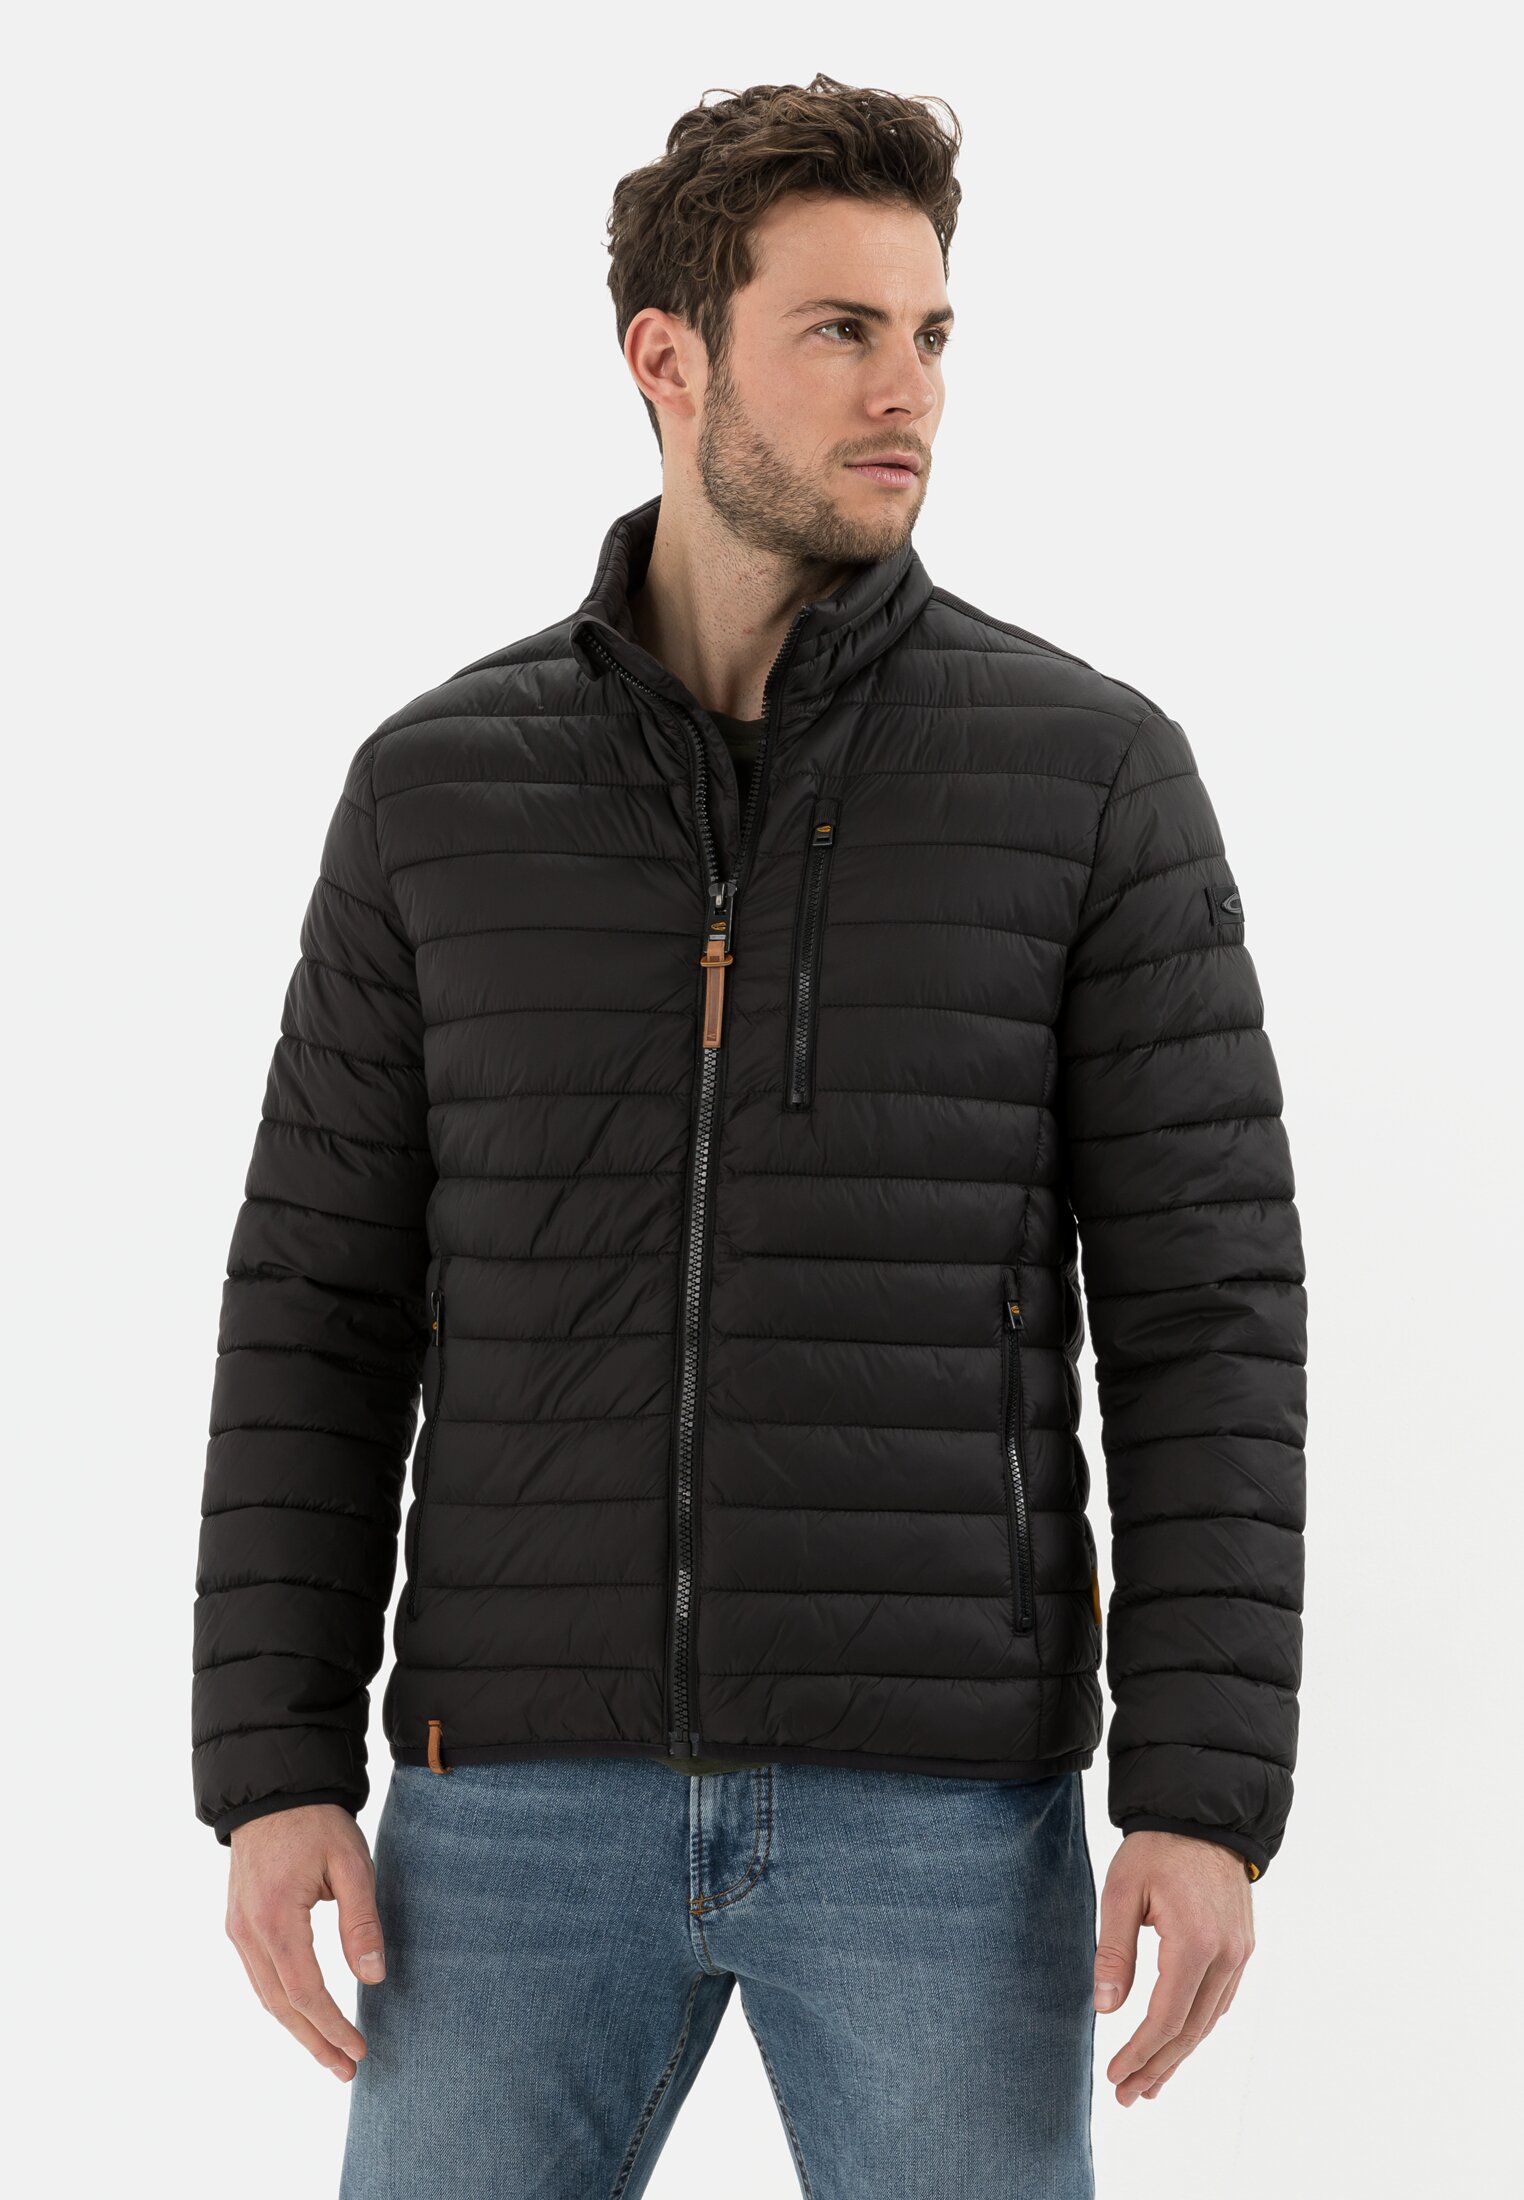 Camel Active Downfree quilted jacket from recycled polyester